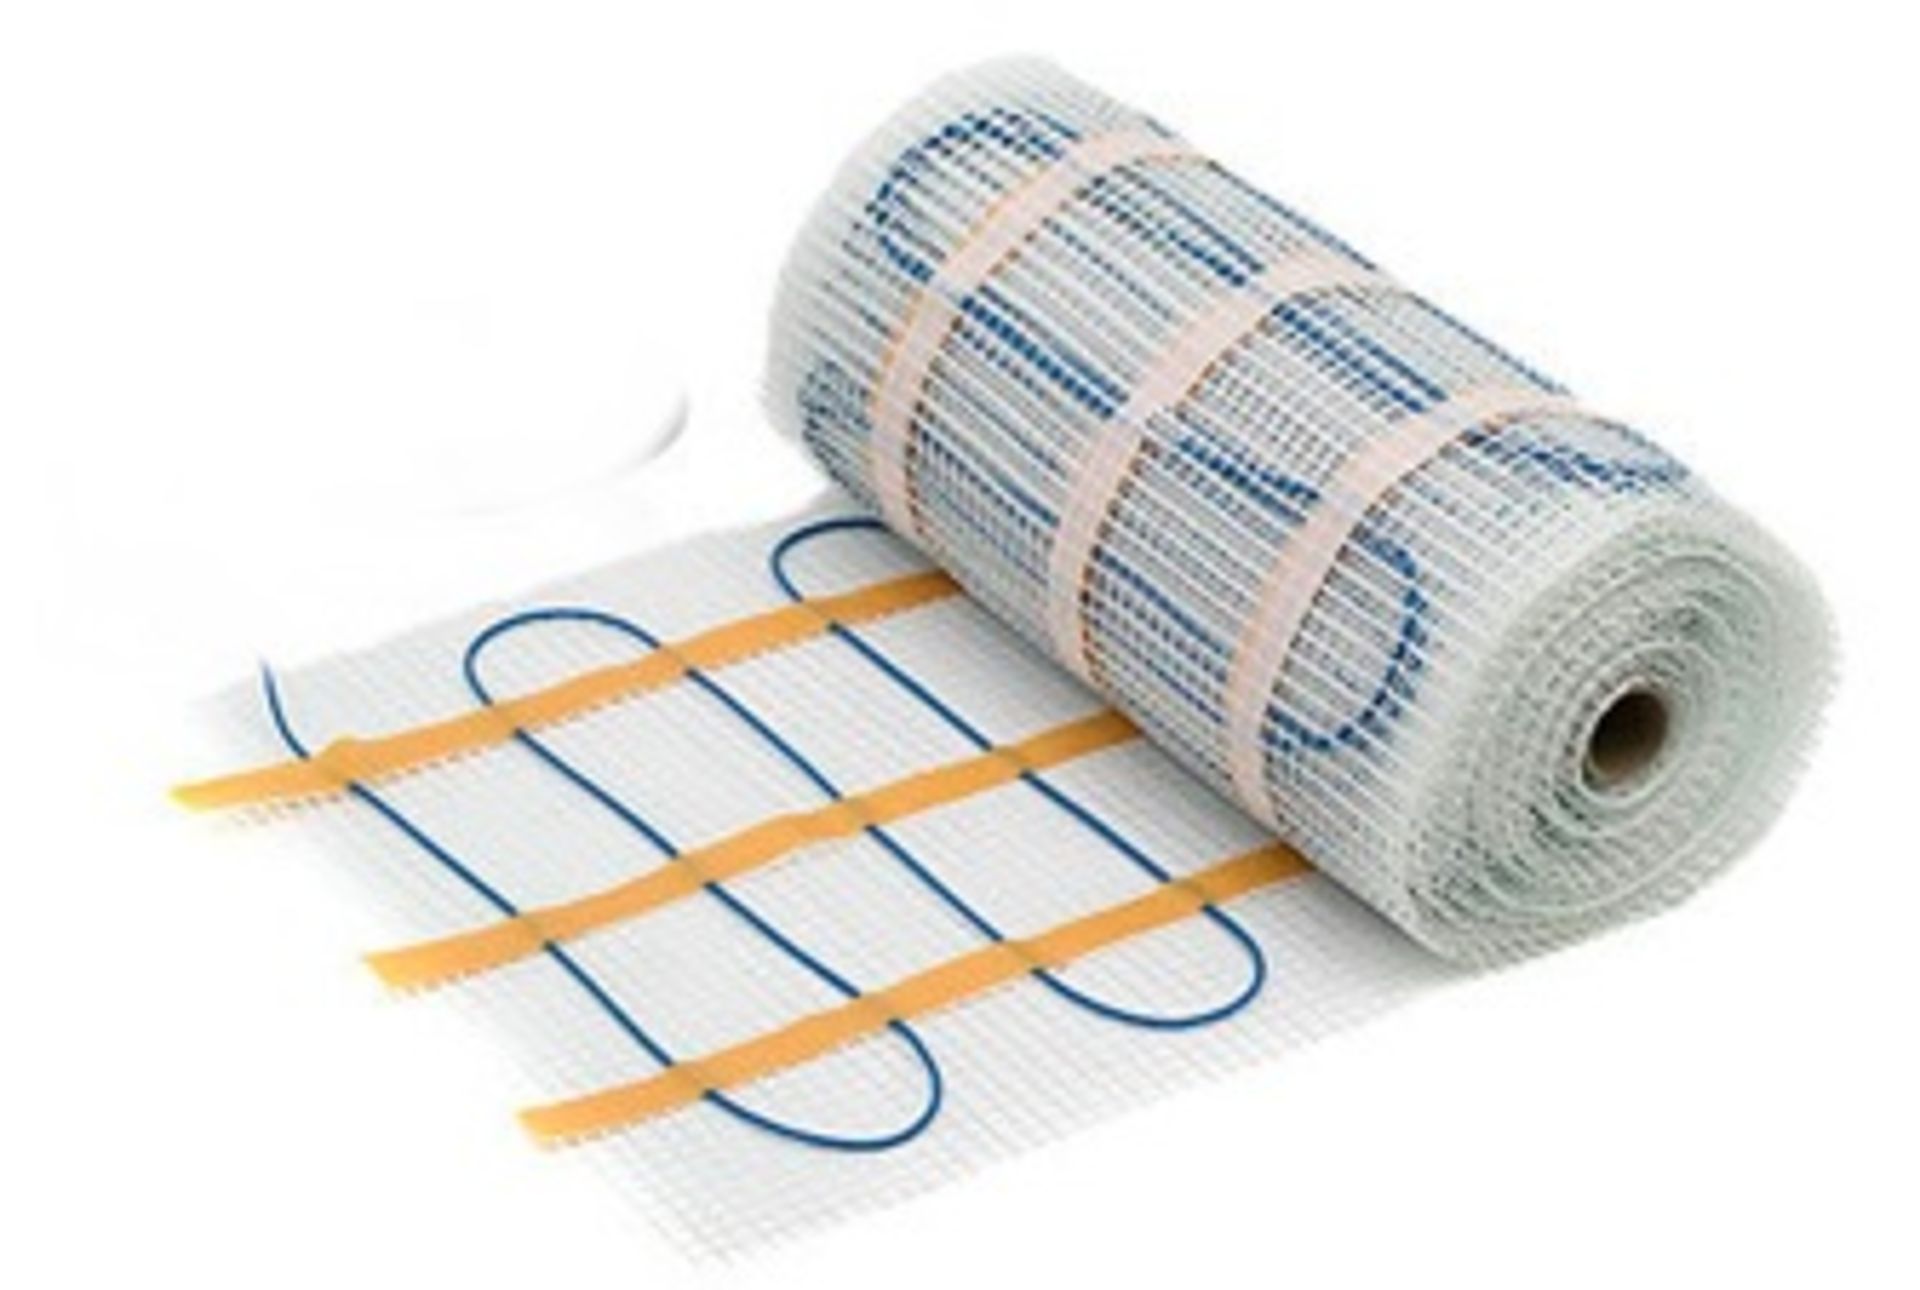 1 x Underfloor Heating System by MyFloorHeating - Covers 1.5 Square Meters - Includes 0.5 x 3m